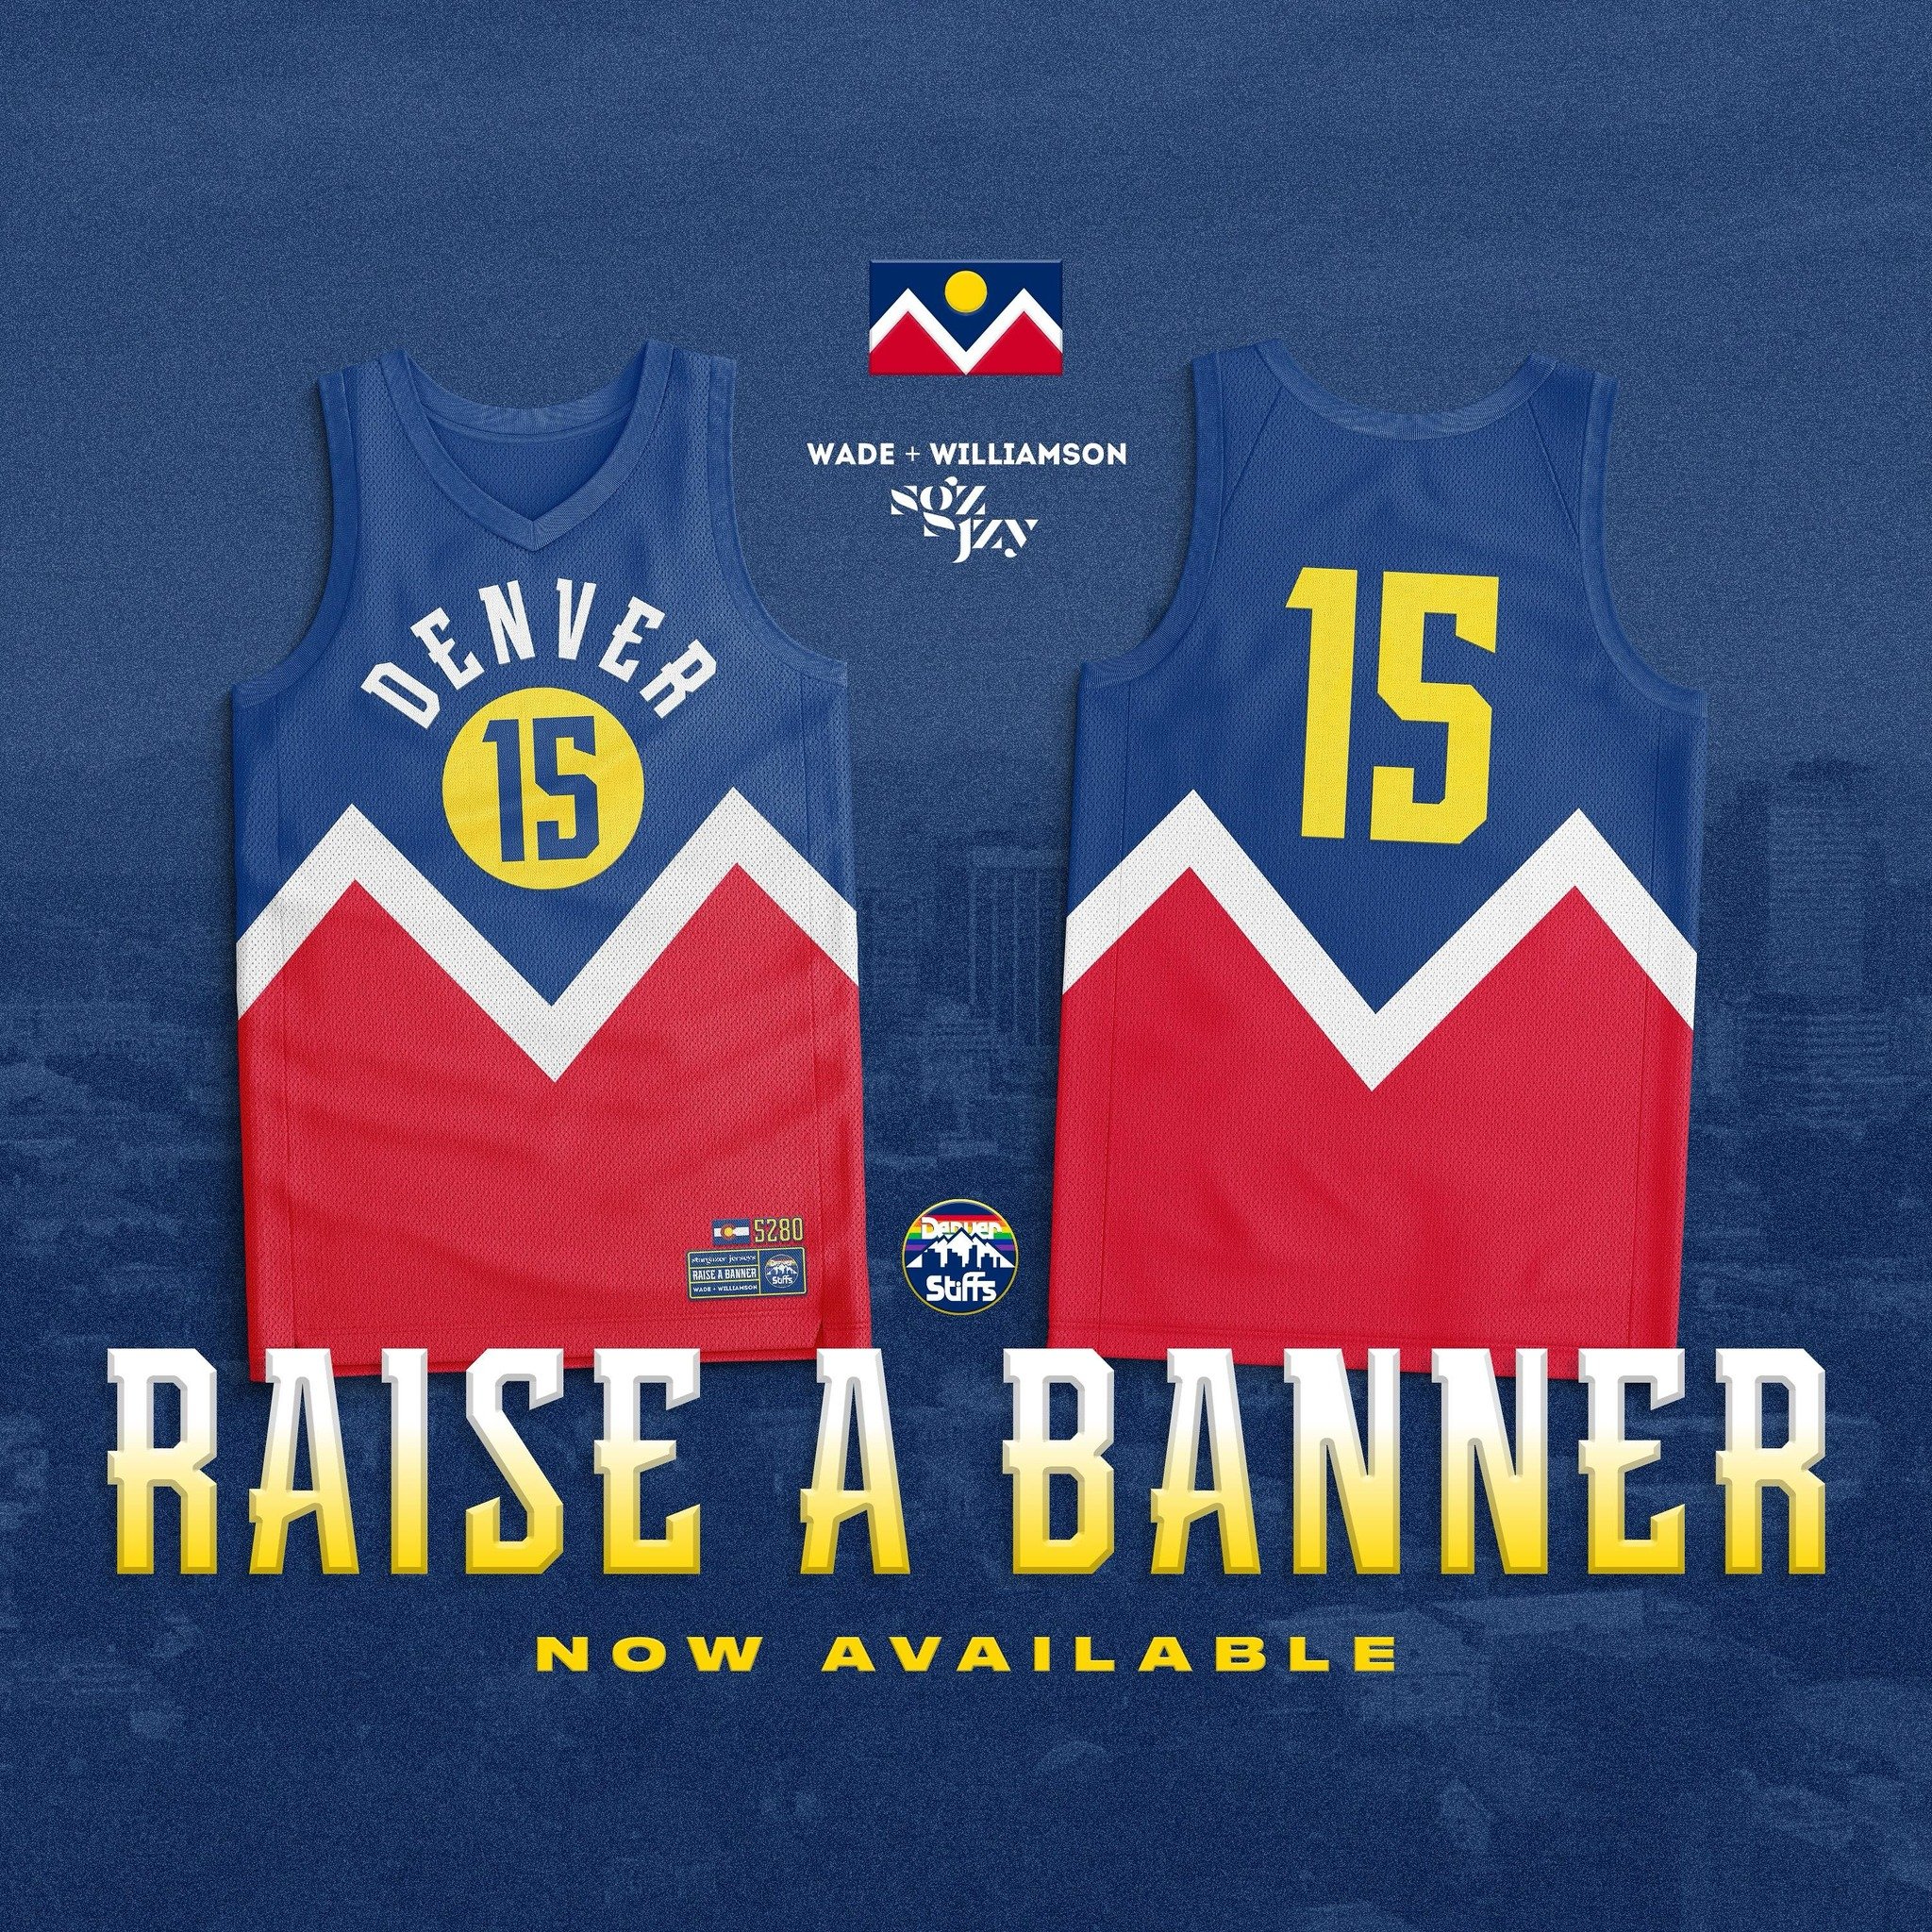 Our good friends at @wadeandwilliamson and @thedenverstiffs have just come out with this amazing jersey just in time for another Nuggets championship run! These are extremely limited and only available until Friday!  So yeah get on it quickly!

Purch